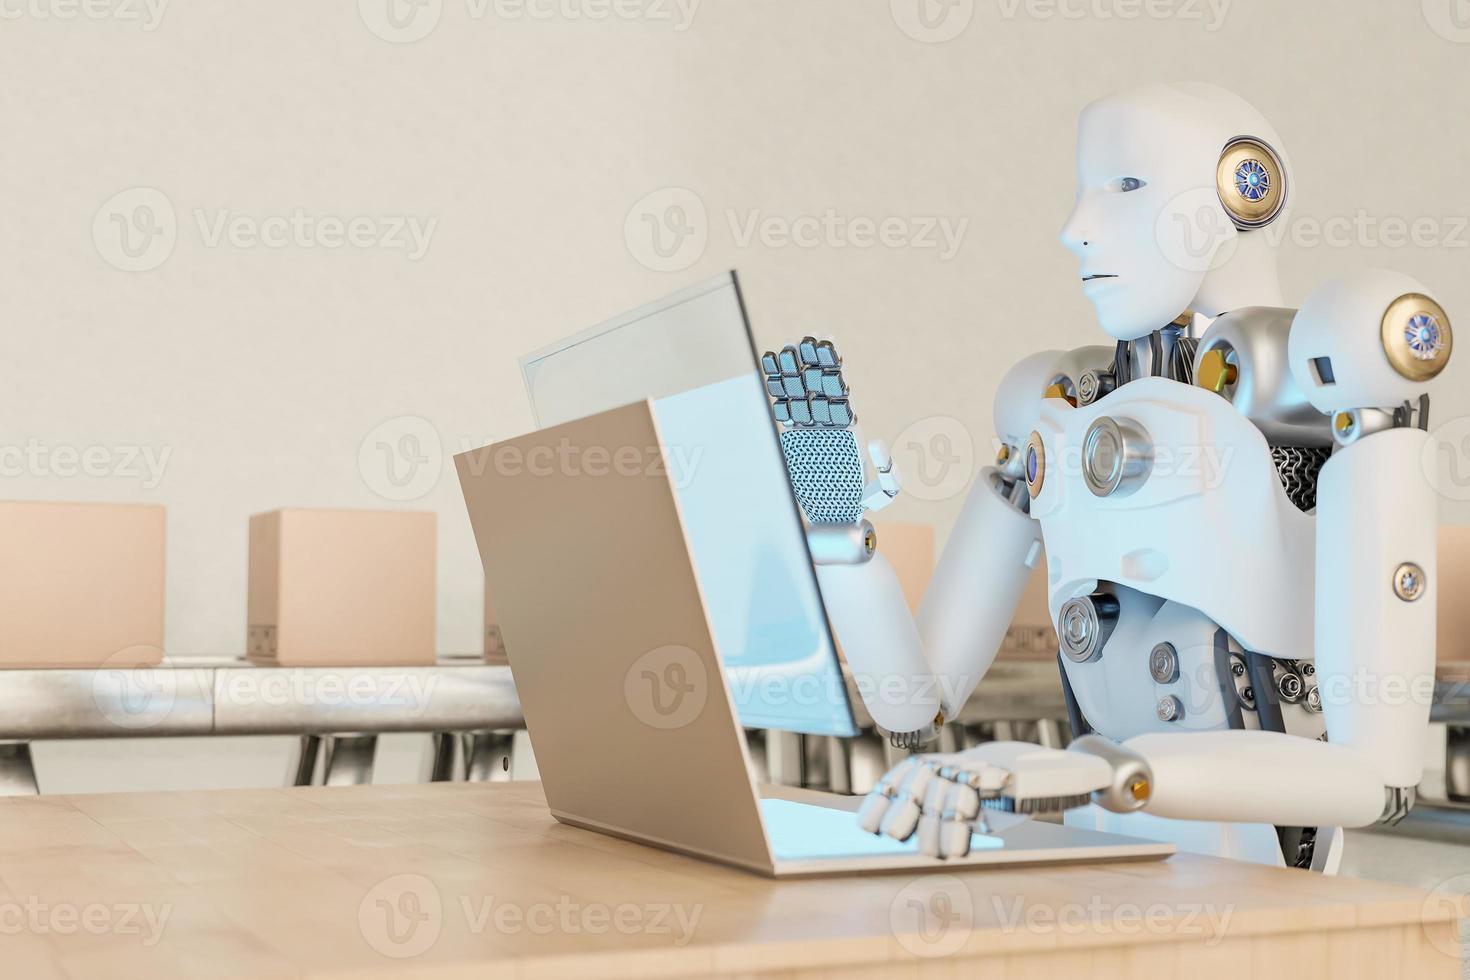 Robot working business to laptop AI UI interface Object manufacturing industry technology Product export and import of future Robot cyber in the warehouse Arm mechanical control future data technology photo